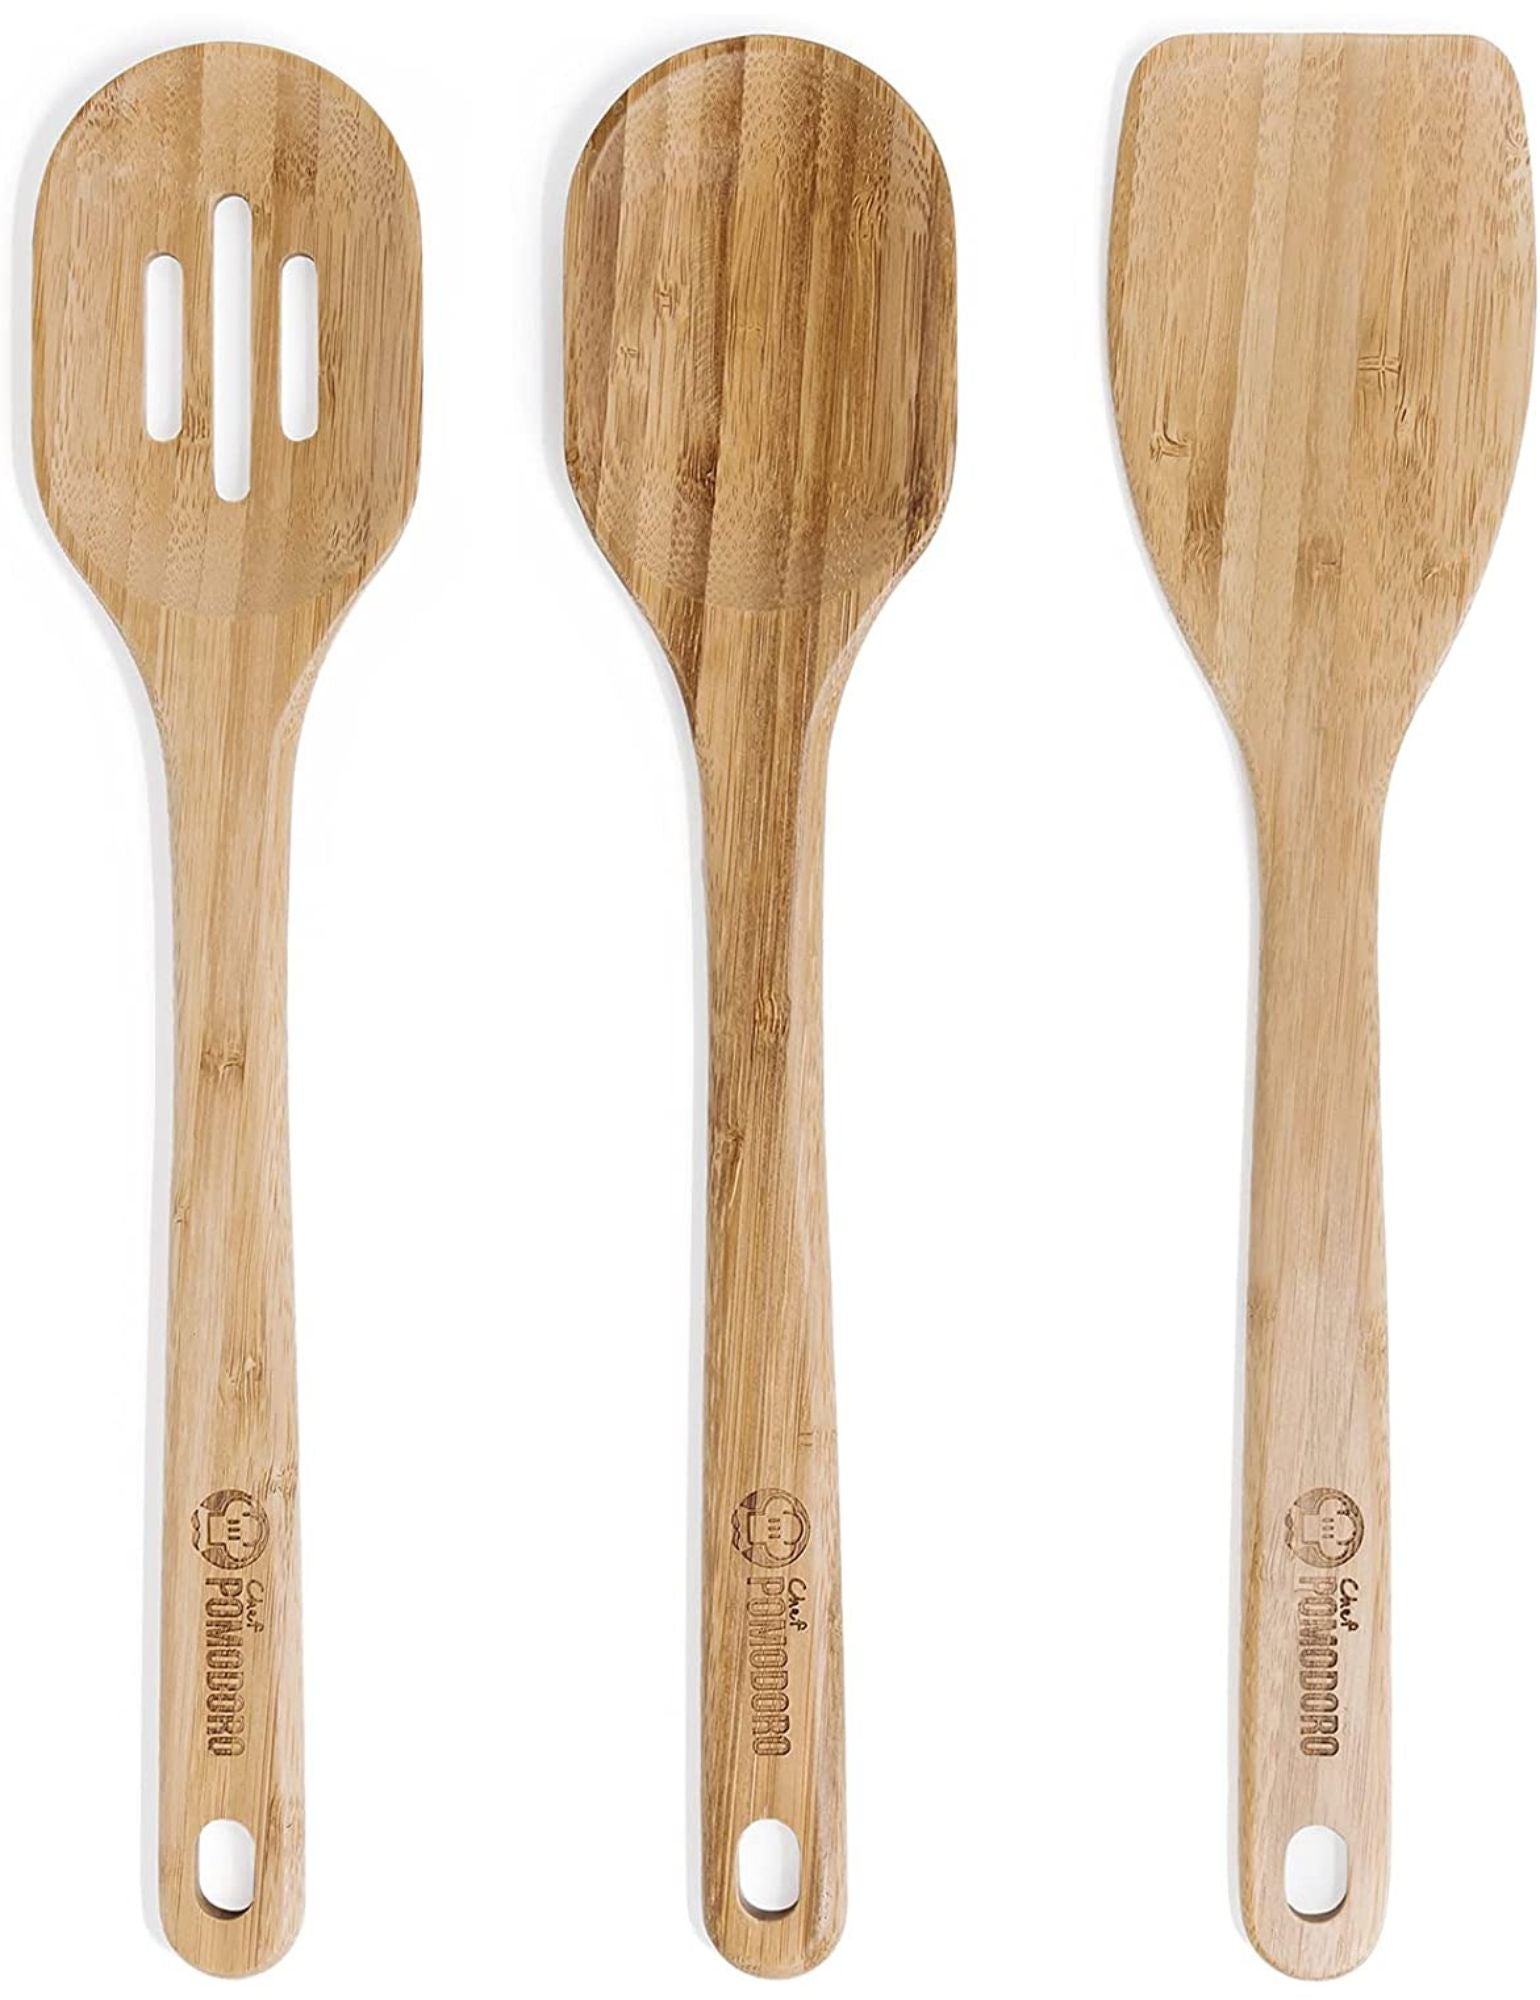 Why Are Wooden Spoons and Utensils Better to Cook With? A Brief